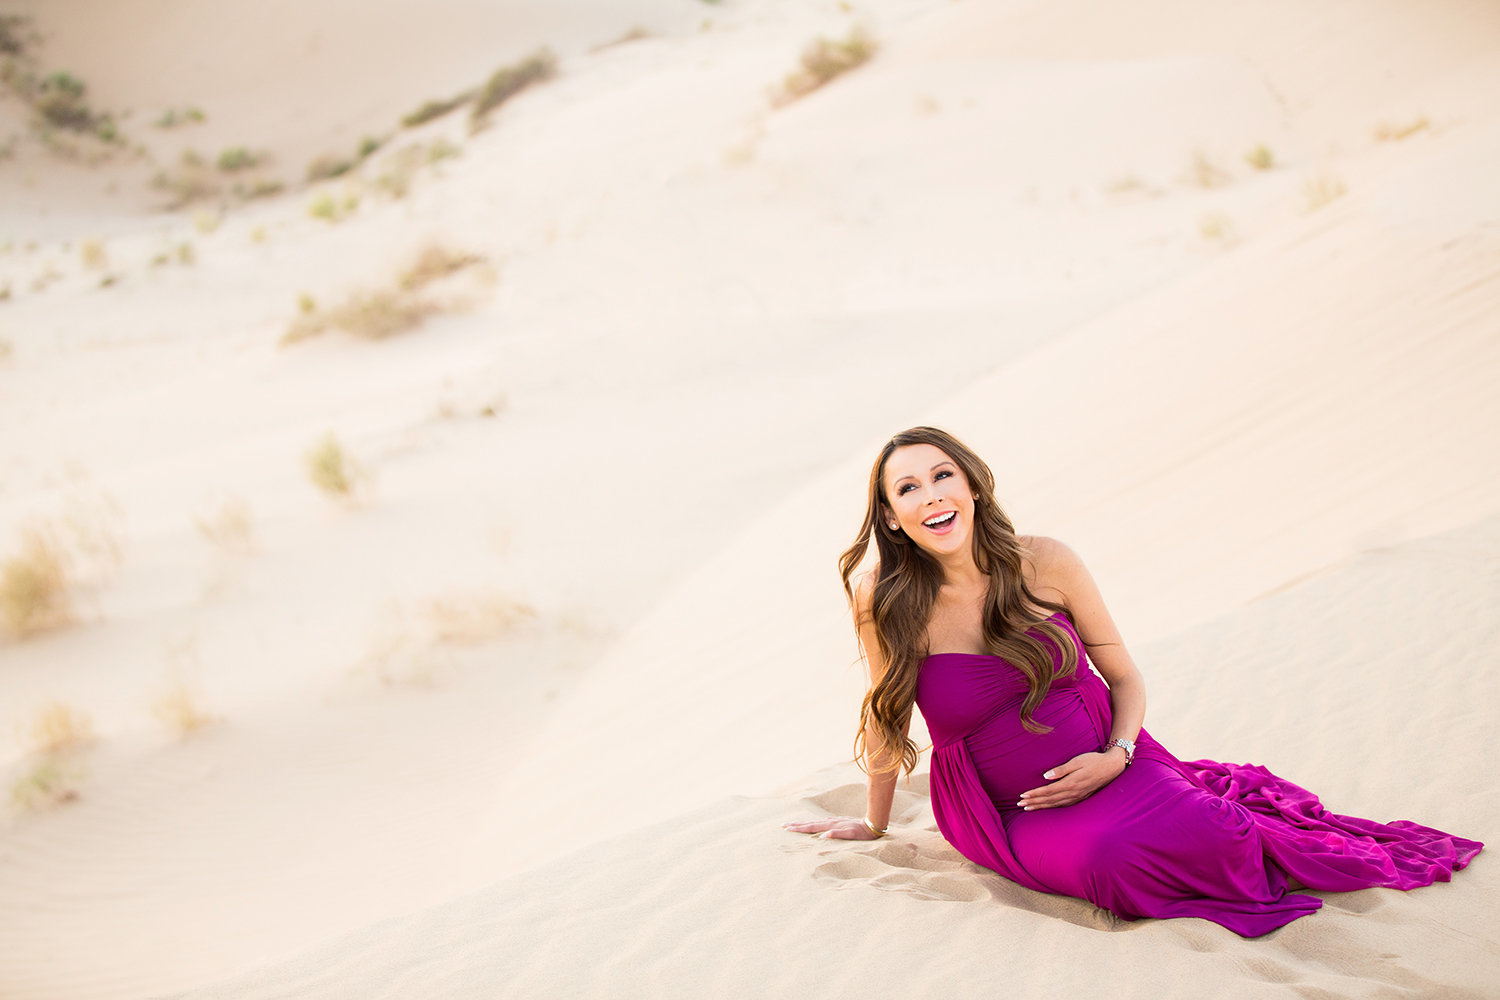 One of a kind Maternity photo at the sand dunes in San Diego.